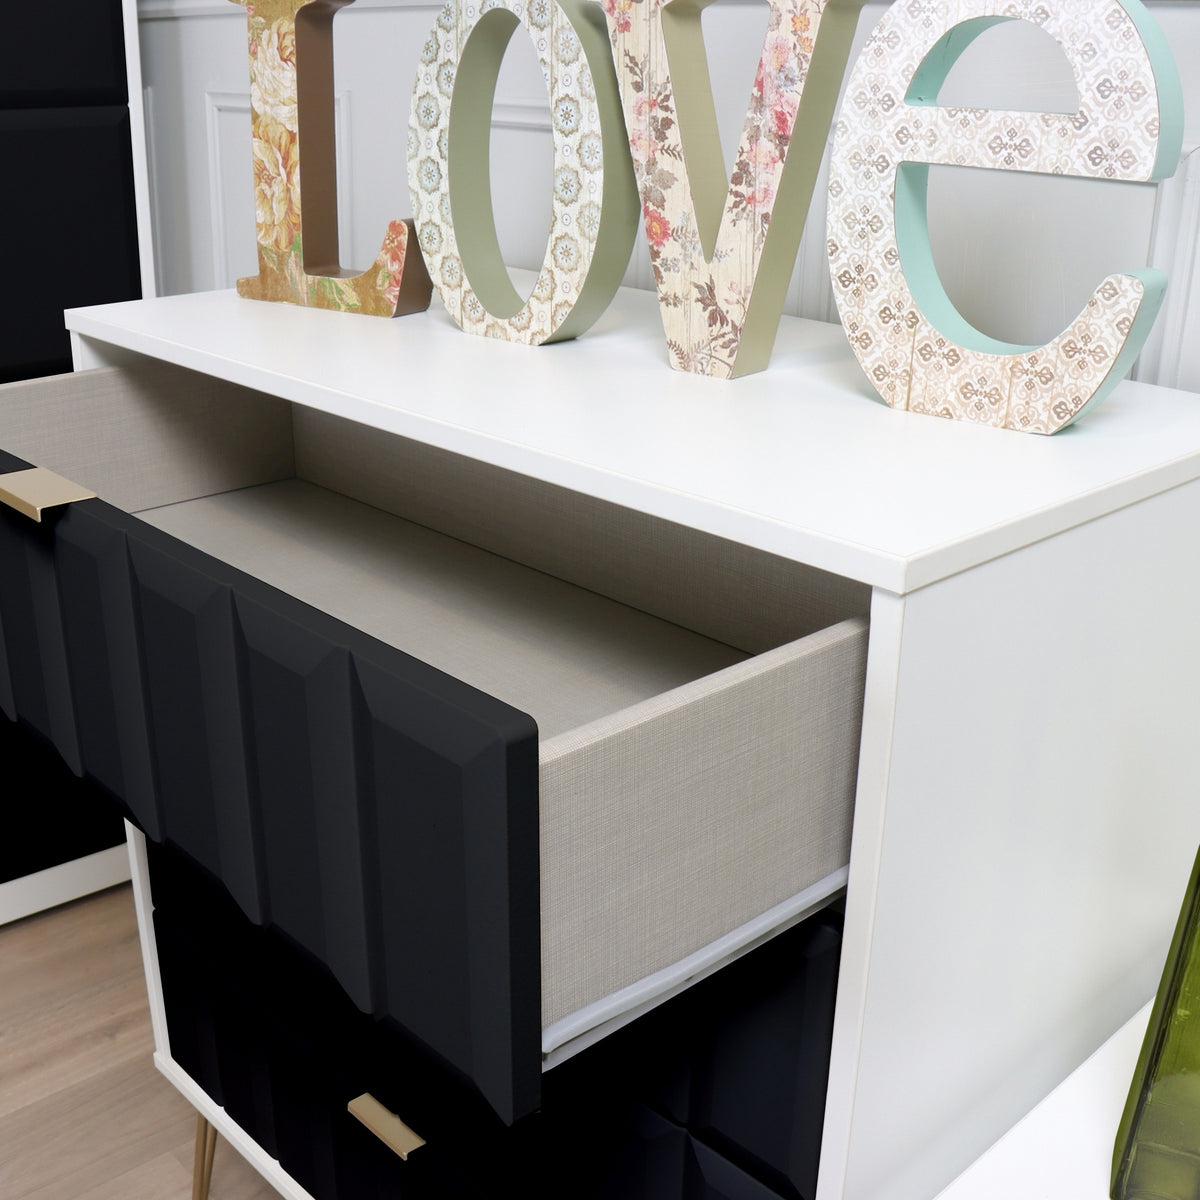 Harlow Black & White 4 Drawer Chest with Gold Hairpin Legs drawer close up